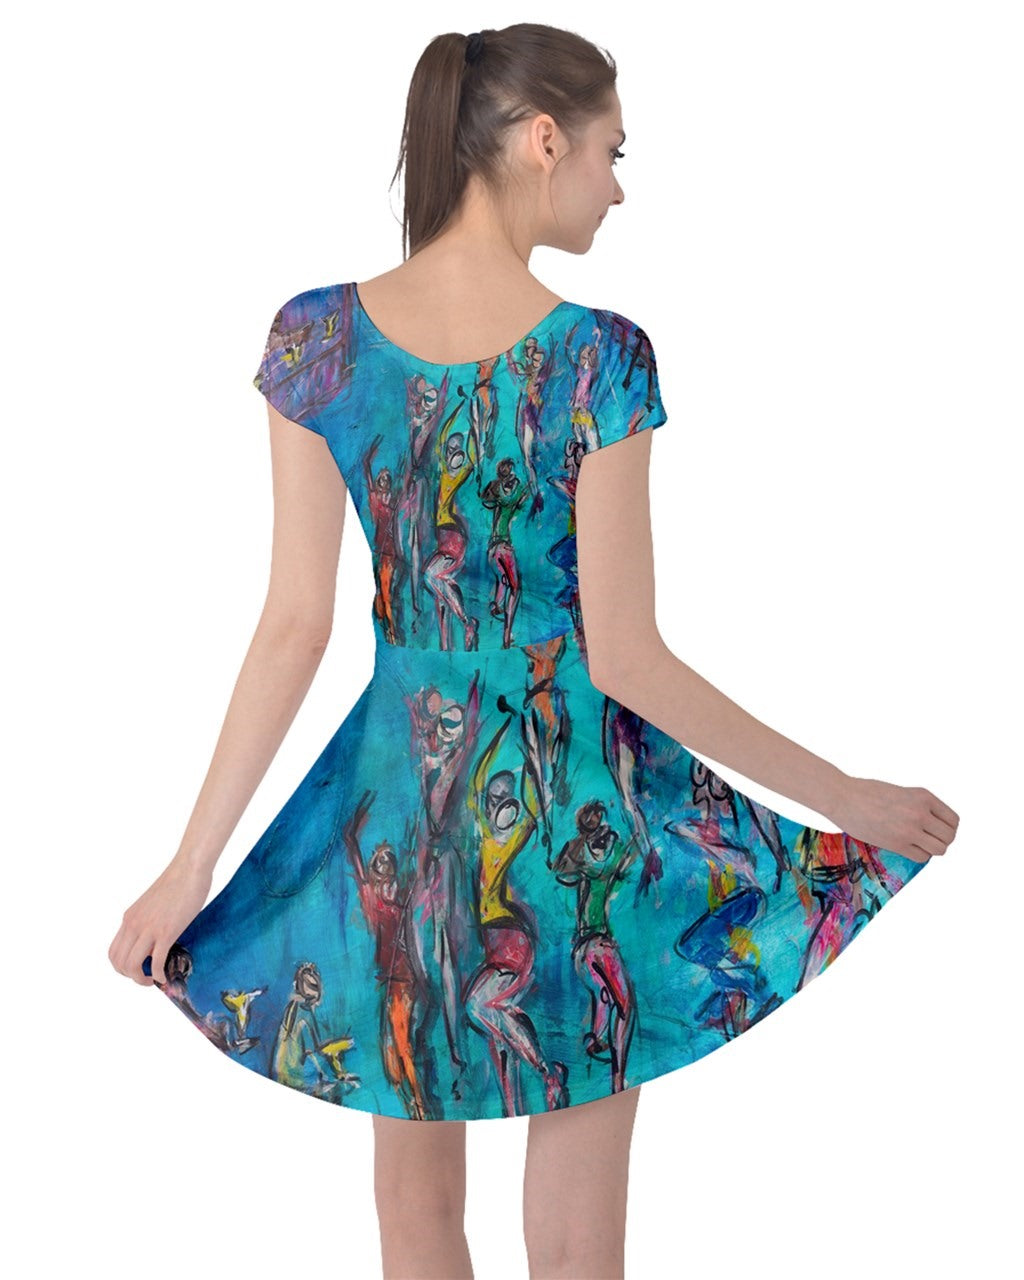  An airy  blue day dress with a vibrant, original art print by Leeorah, designed to flatter all sizes. The dress features a relaxed silhouette and soft fabric, promising comfort and style for any occasion. Back view